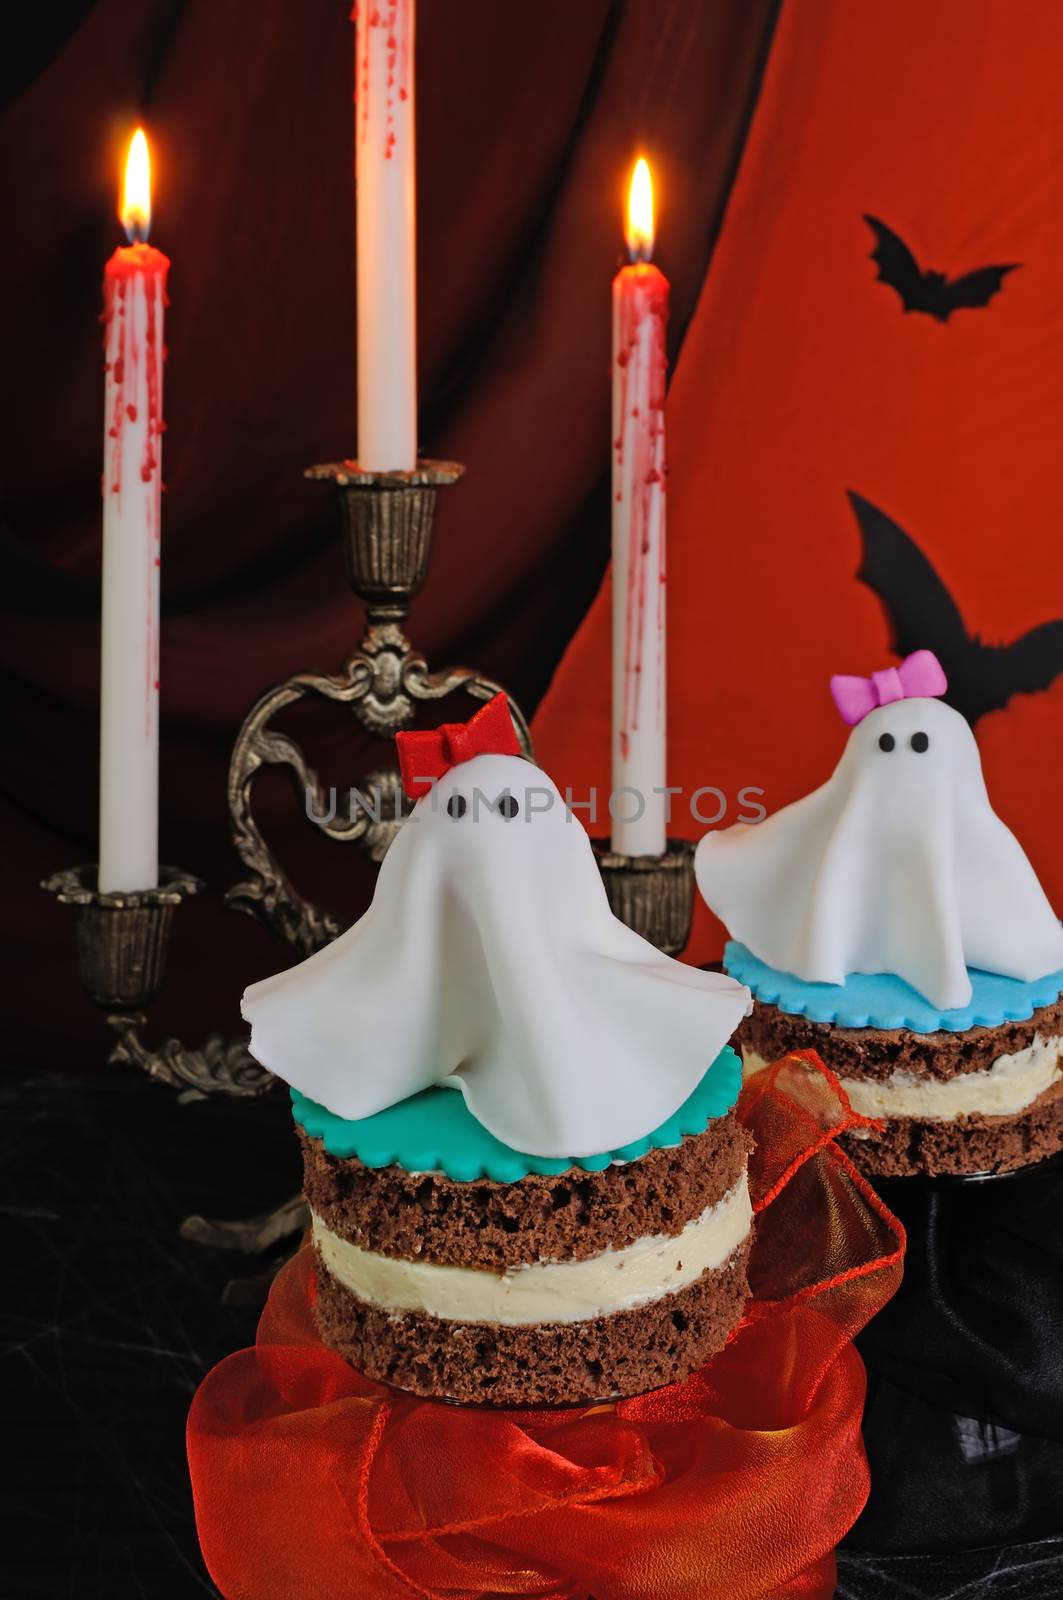 Marzipan ghost on Sponge cake with cream